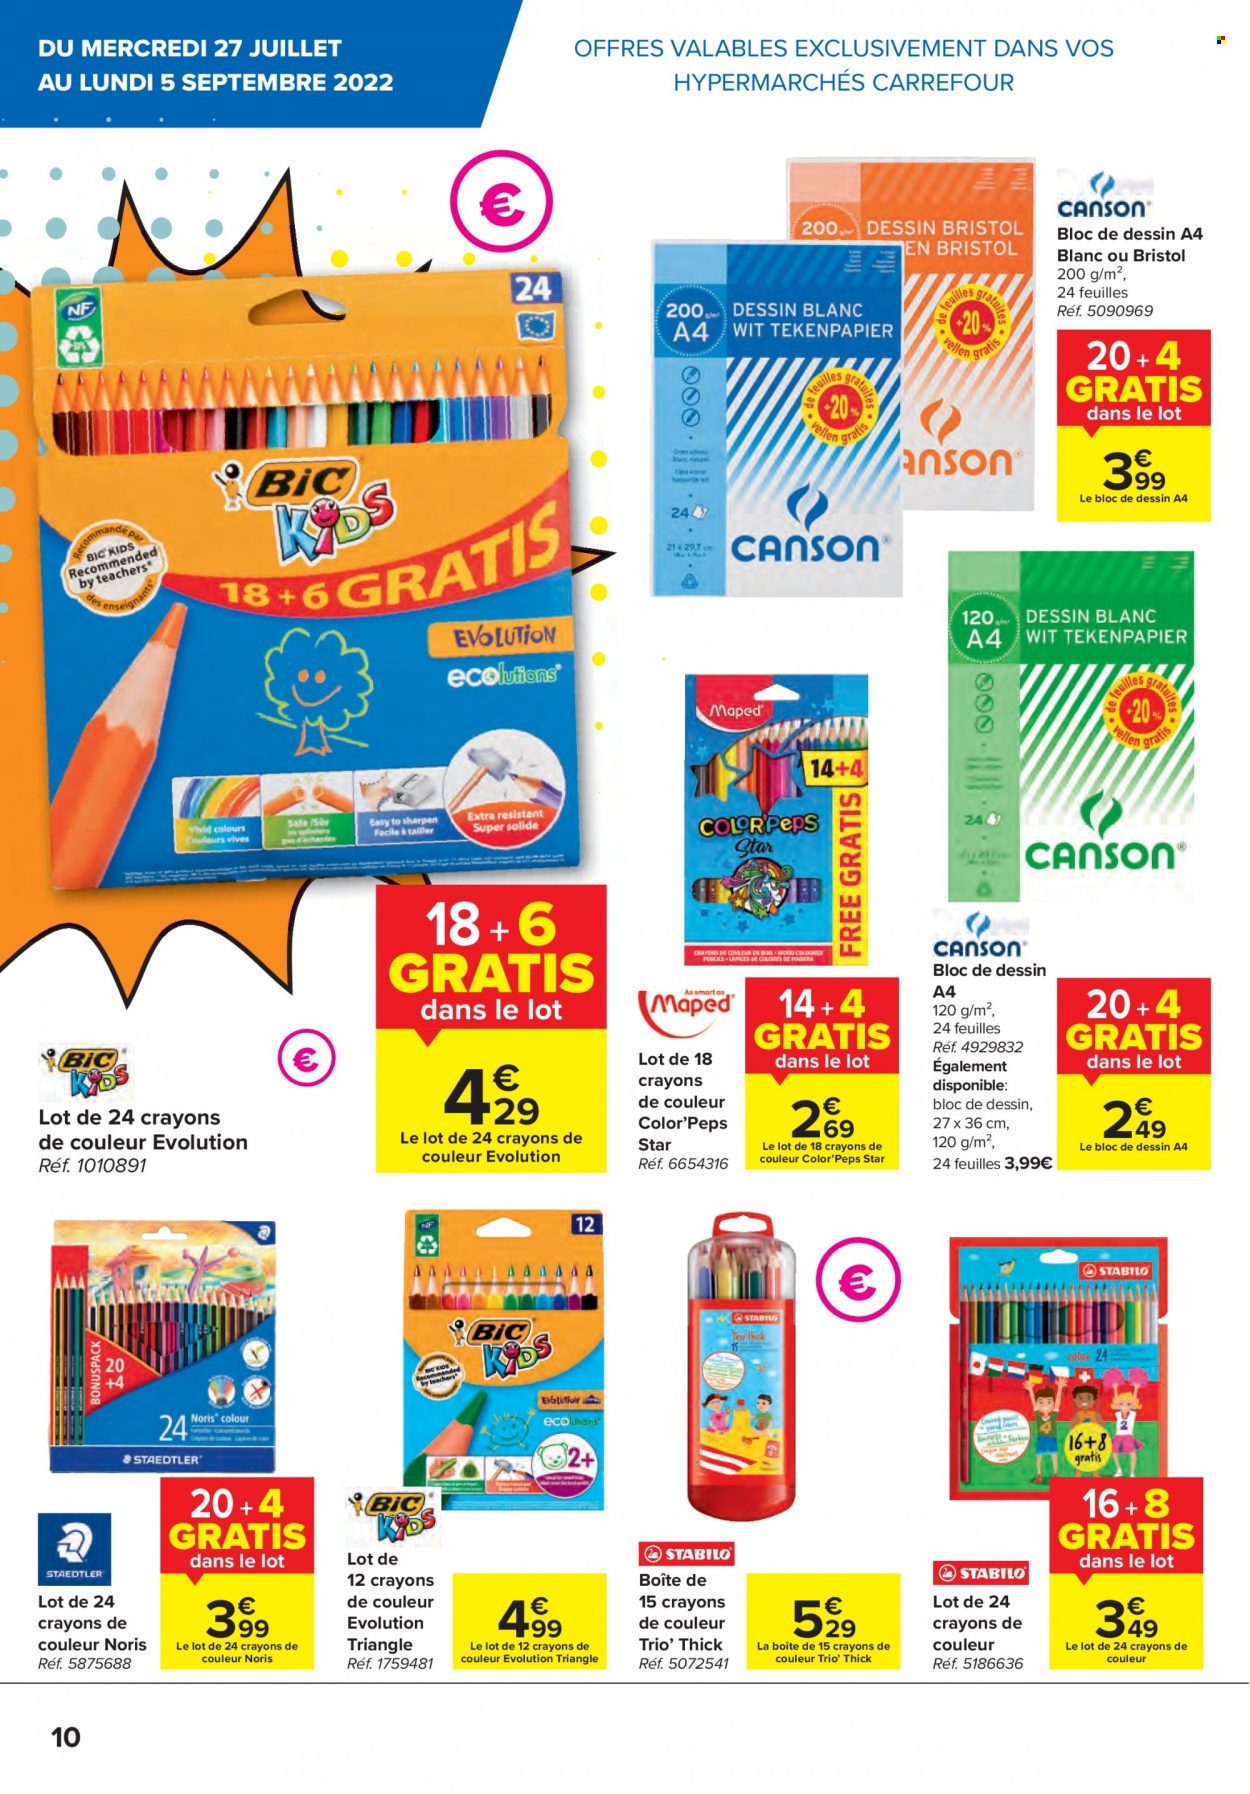 Catalogue Carrefour hypermarkt - 27.7.2022 - 5.9.2022. Page 10.